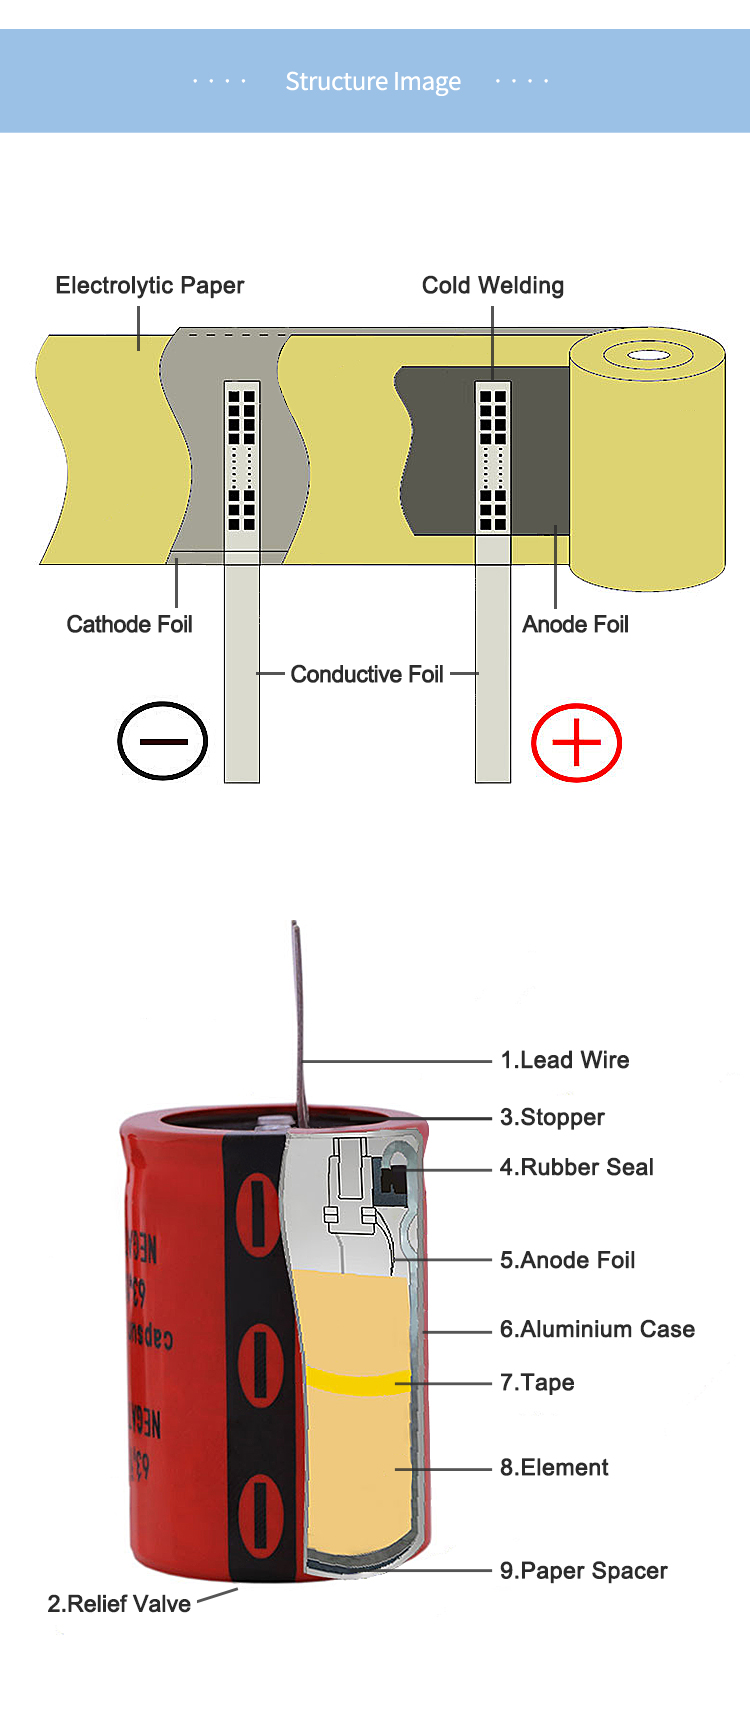 electrolytic capacitor structure.jpg